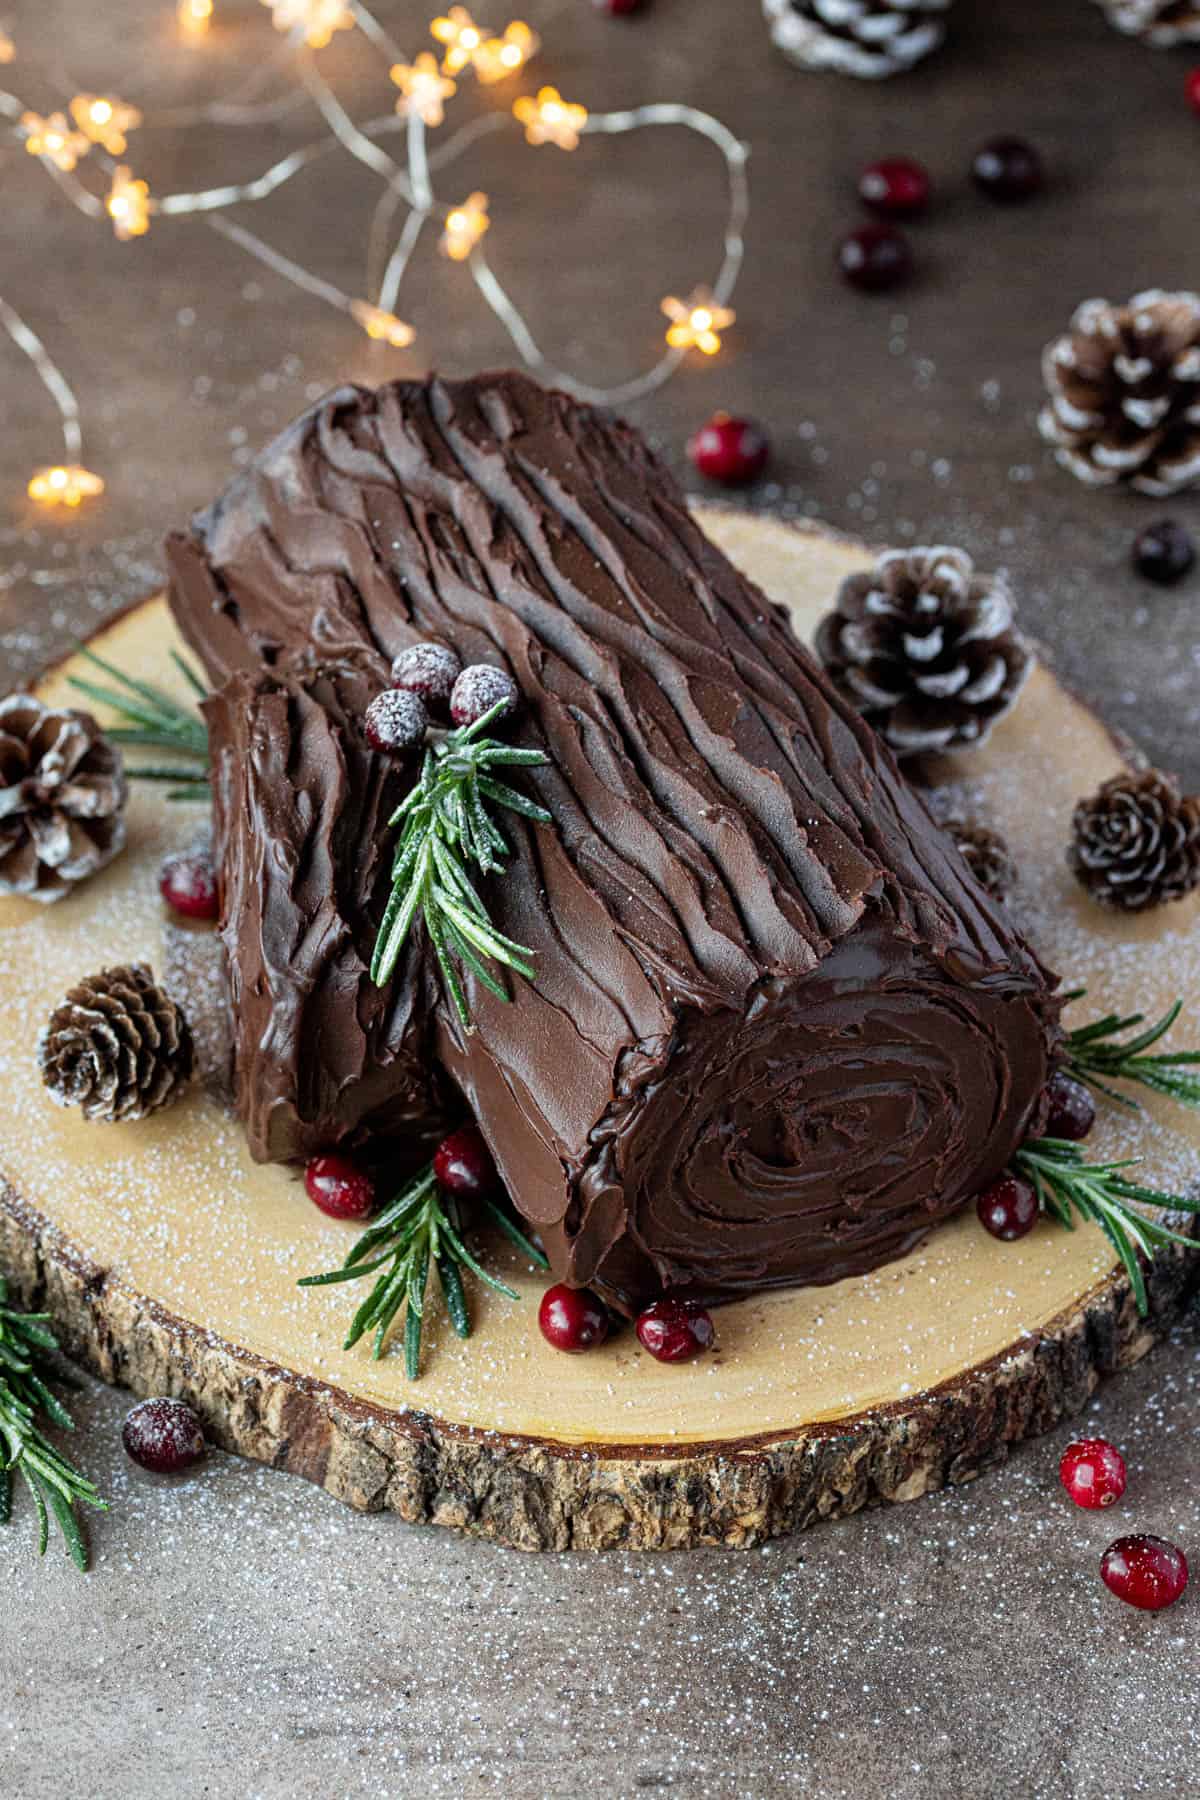 The decorated yule log on a wooden board.